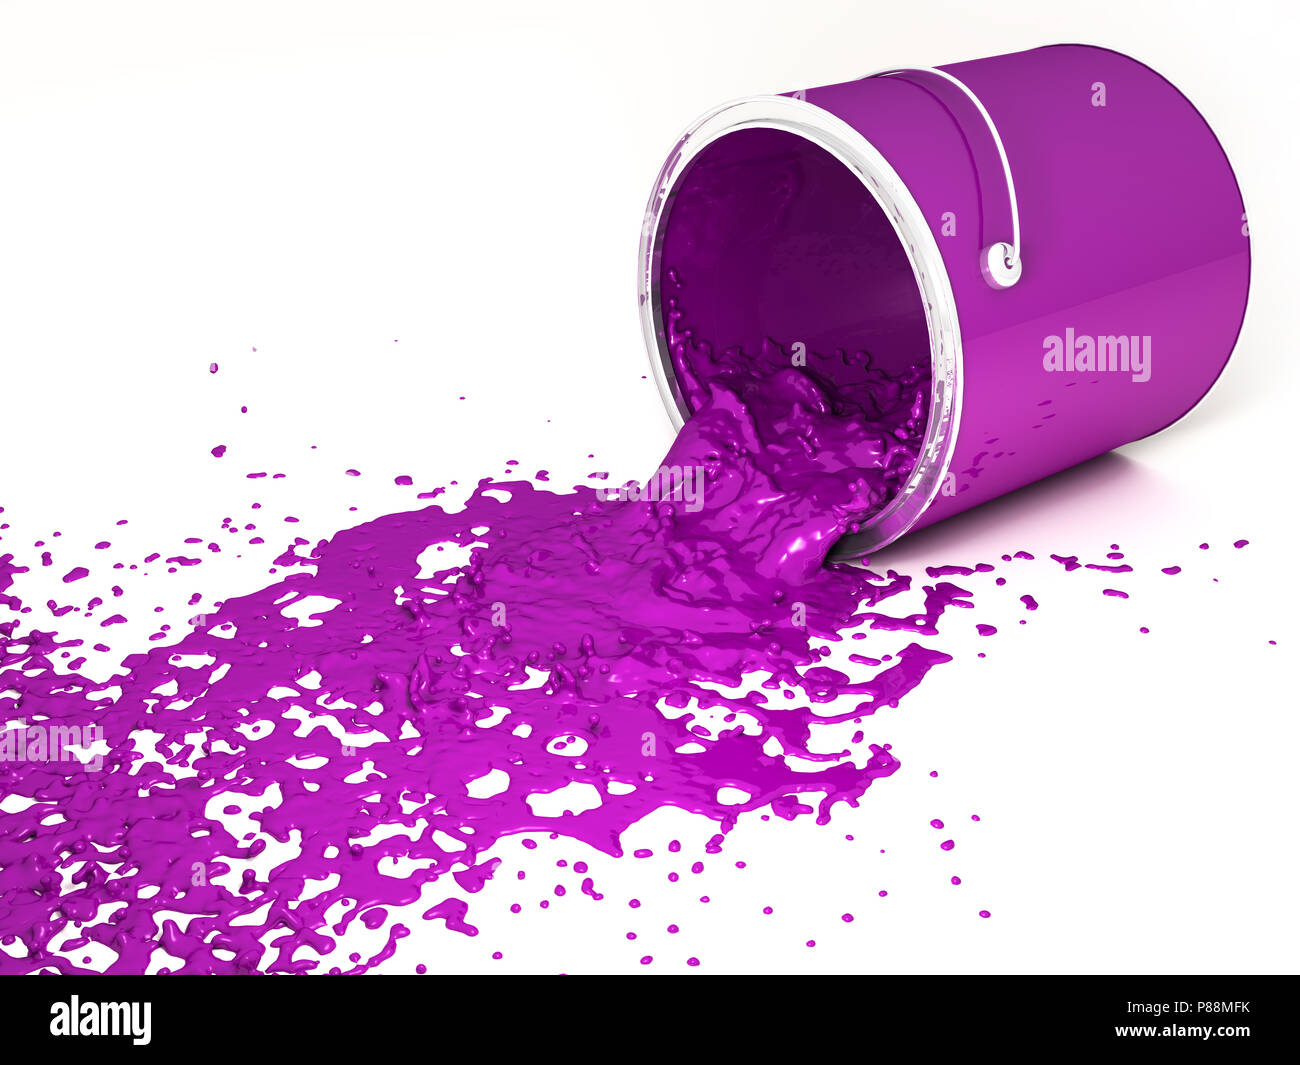 Magenta paint bucket upside down on a white background. Stock Photo